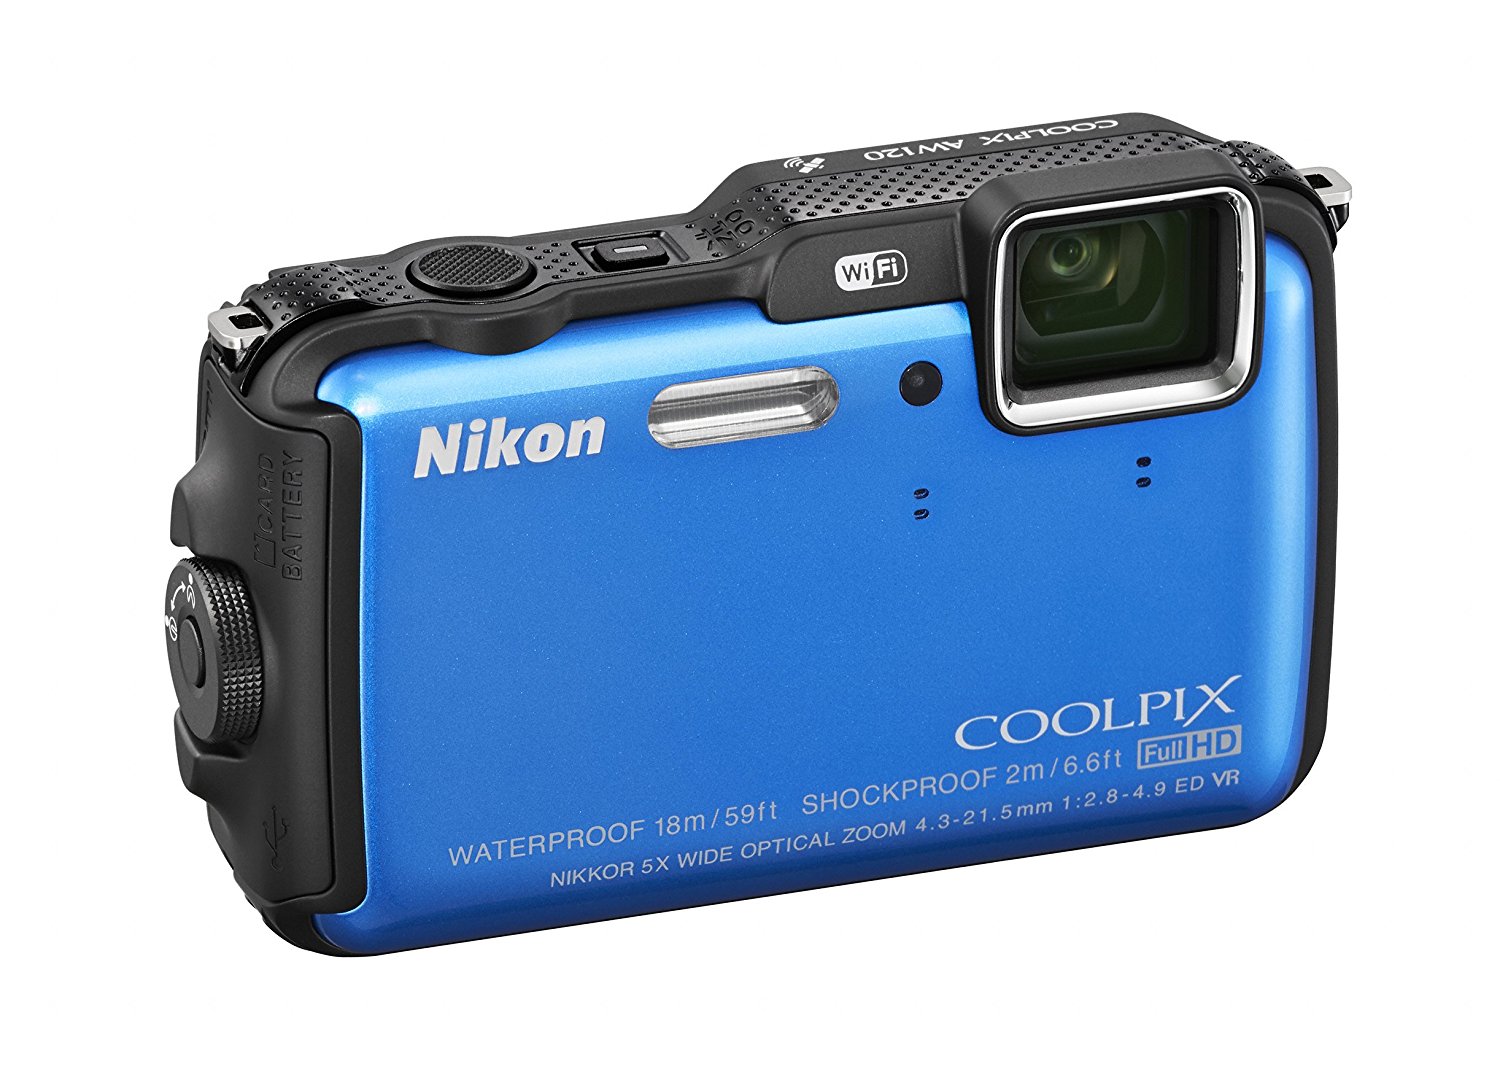 Nikon Coolpix Aw120 161 Mp Wi Fi And Waterproof Digital Camera With Gps And Full Hd 1080p Video 4721